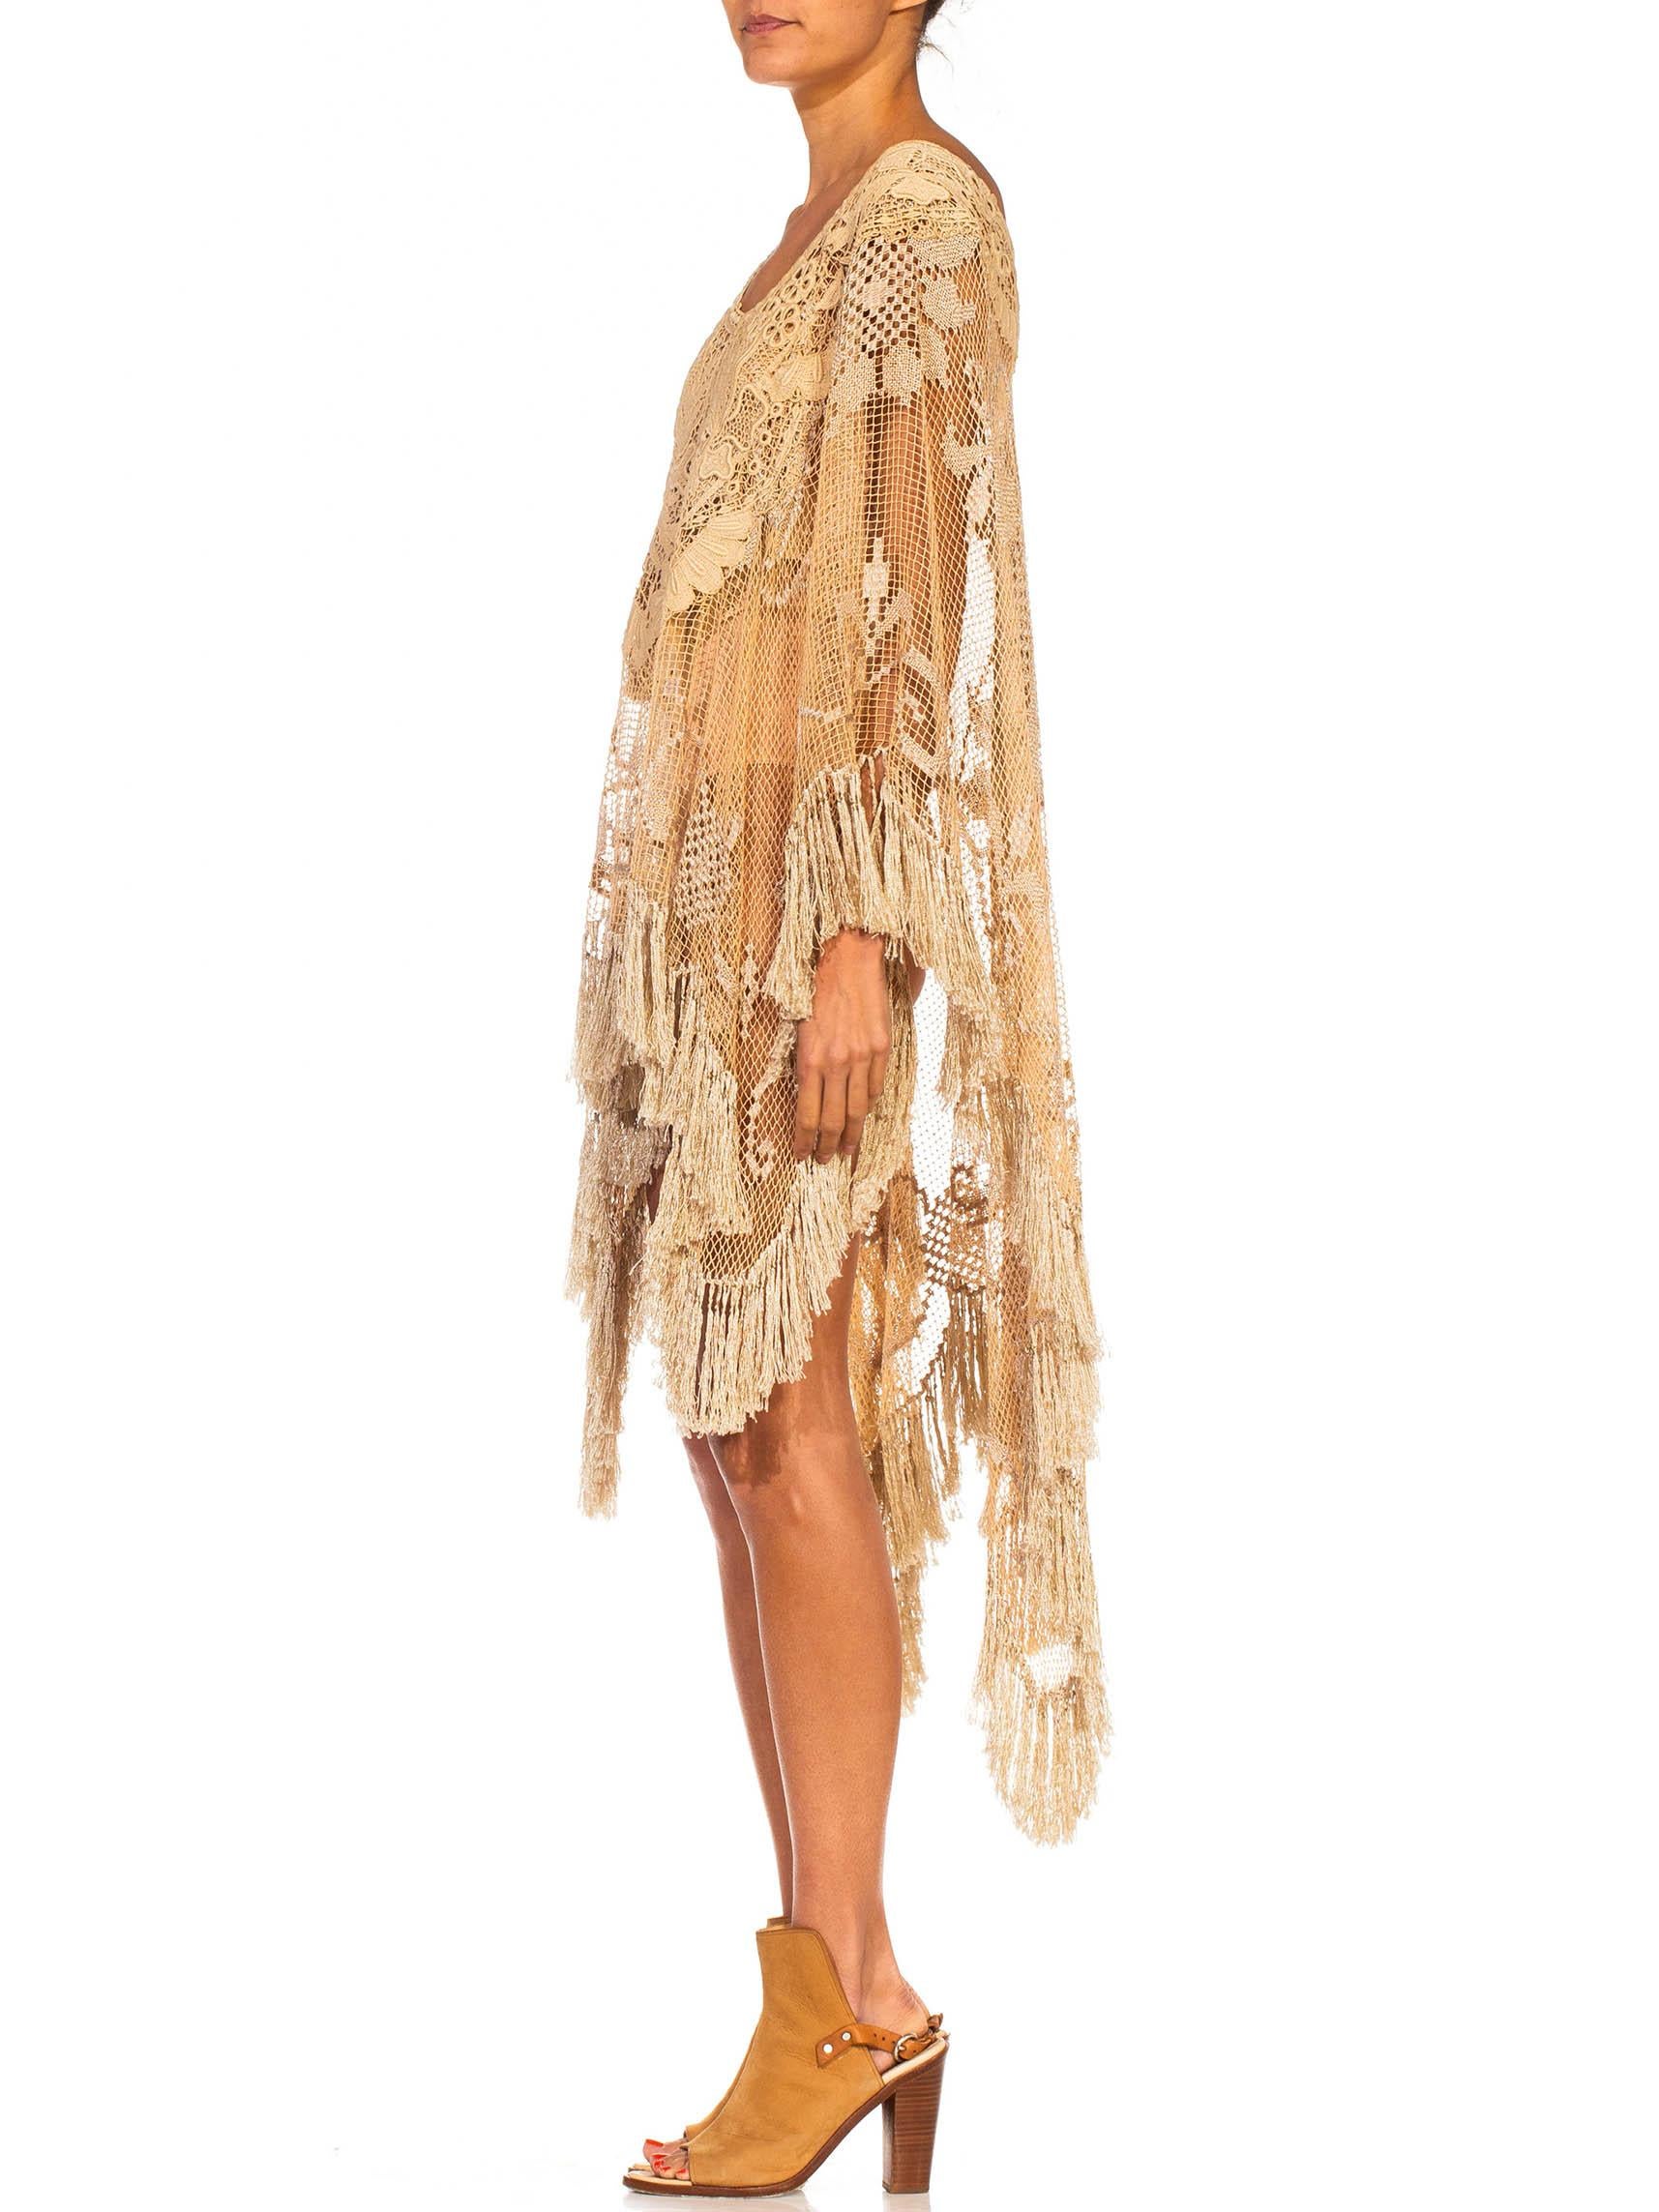 MORPHEW COLLECTION Ecru Edwardian Hand Made Cotton & Rayon Fringed Lace Kaftan Tunic
MORPHEW COLLECTION is made entirely by hand in our NYC Ateliér of rare antique materials sourced from around the globe. Our sustainable vintage materials represent